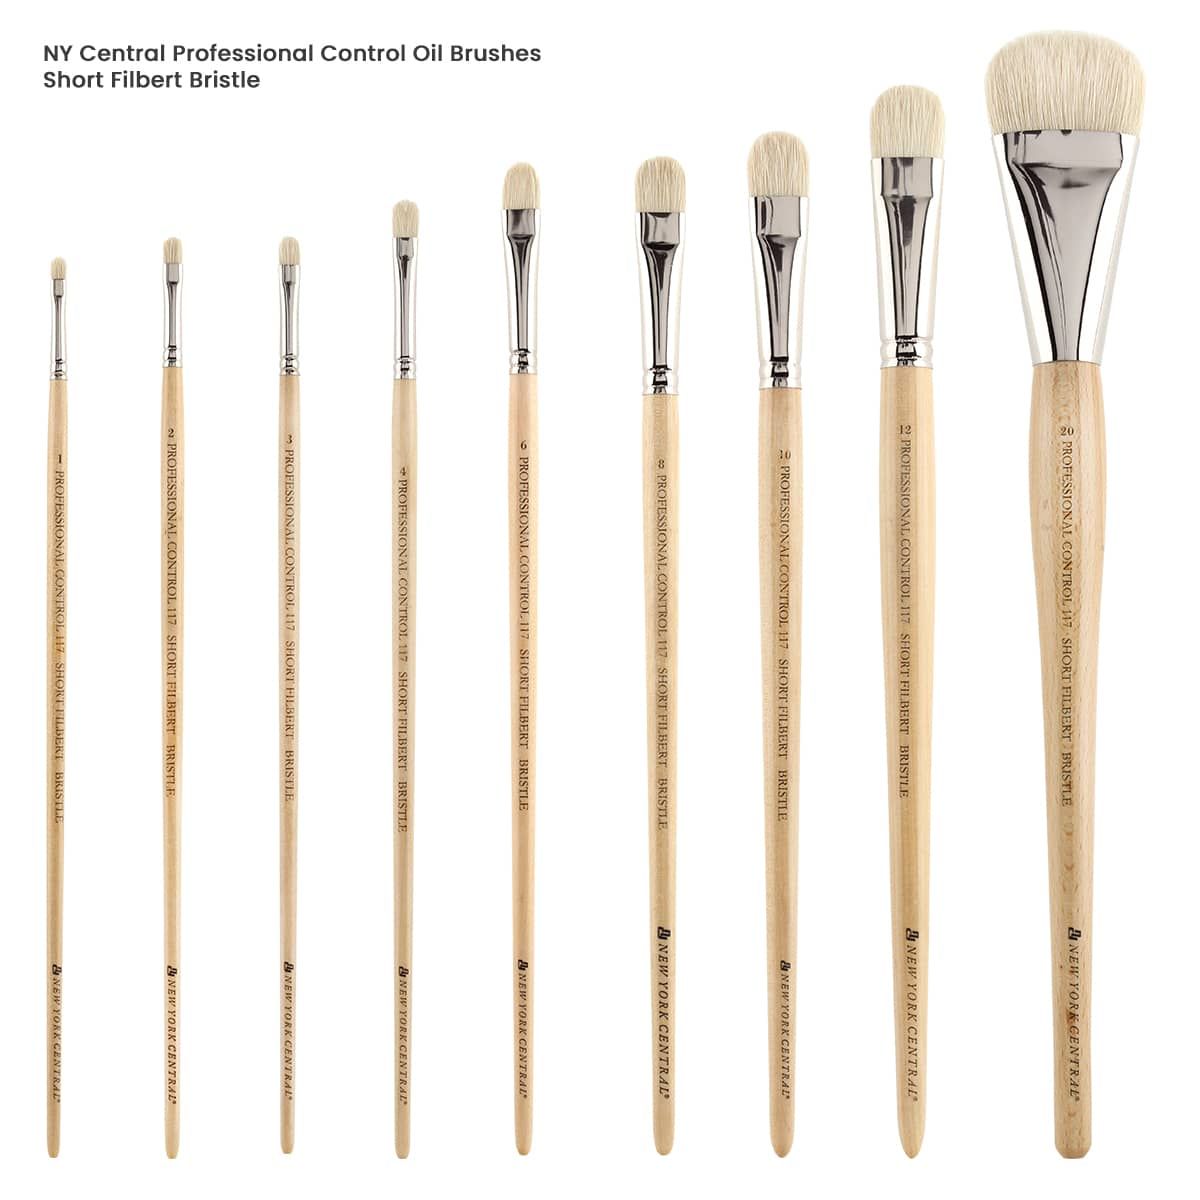 NY Central Pro Control Short Filbert Bristle Brushes